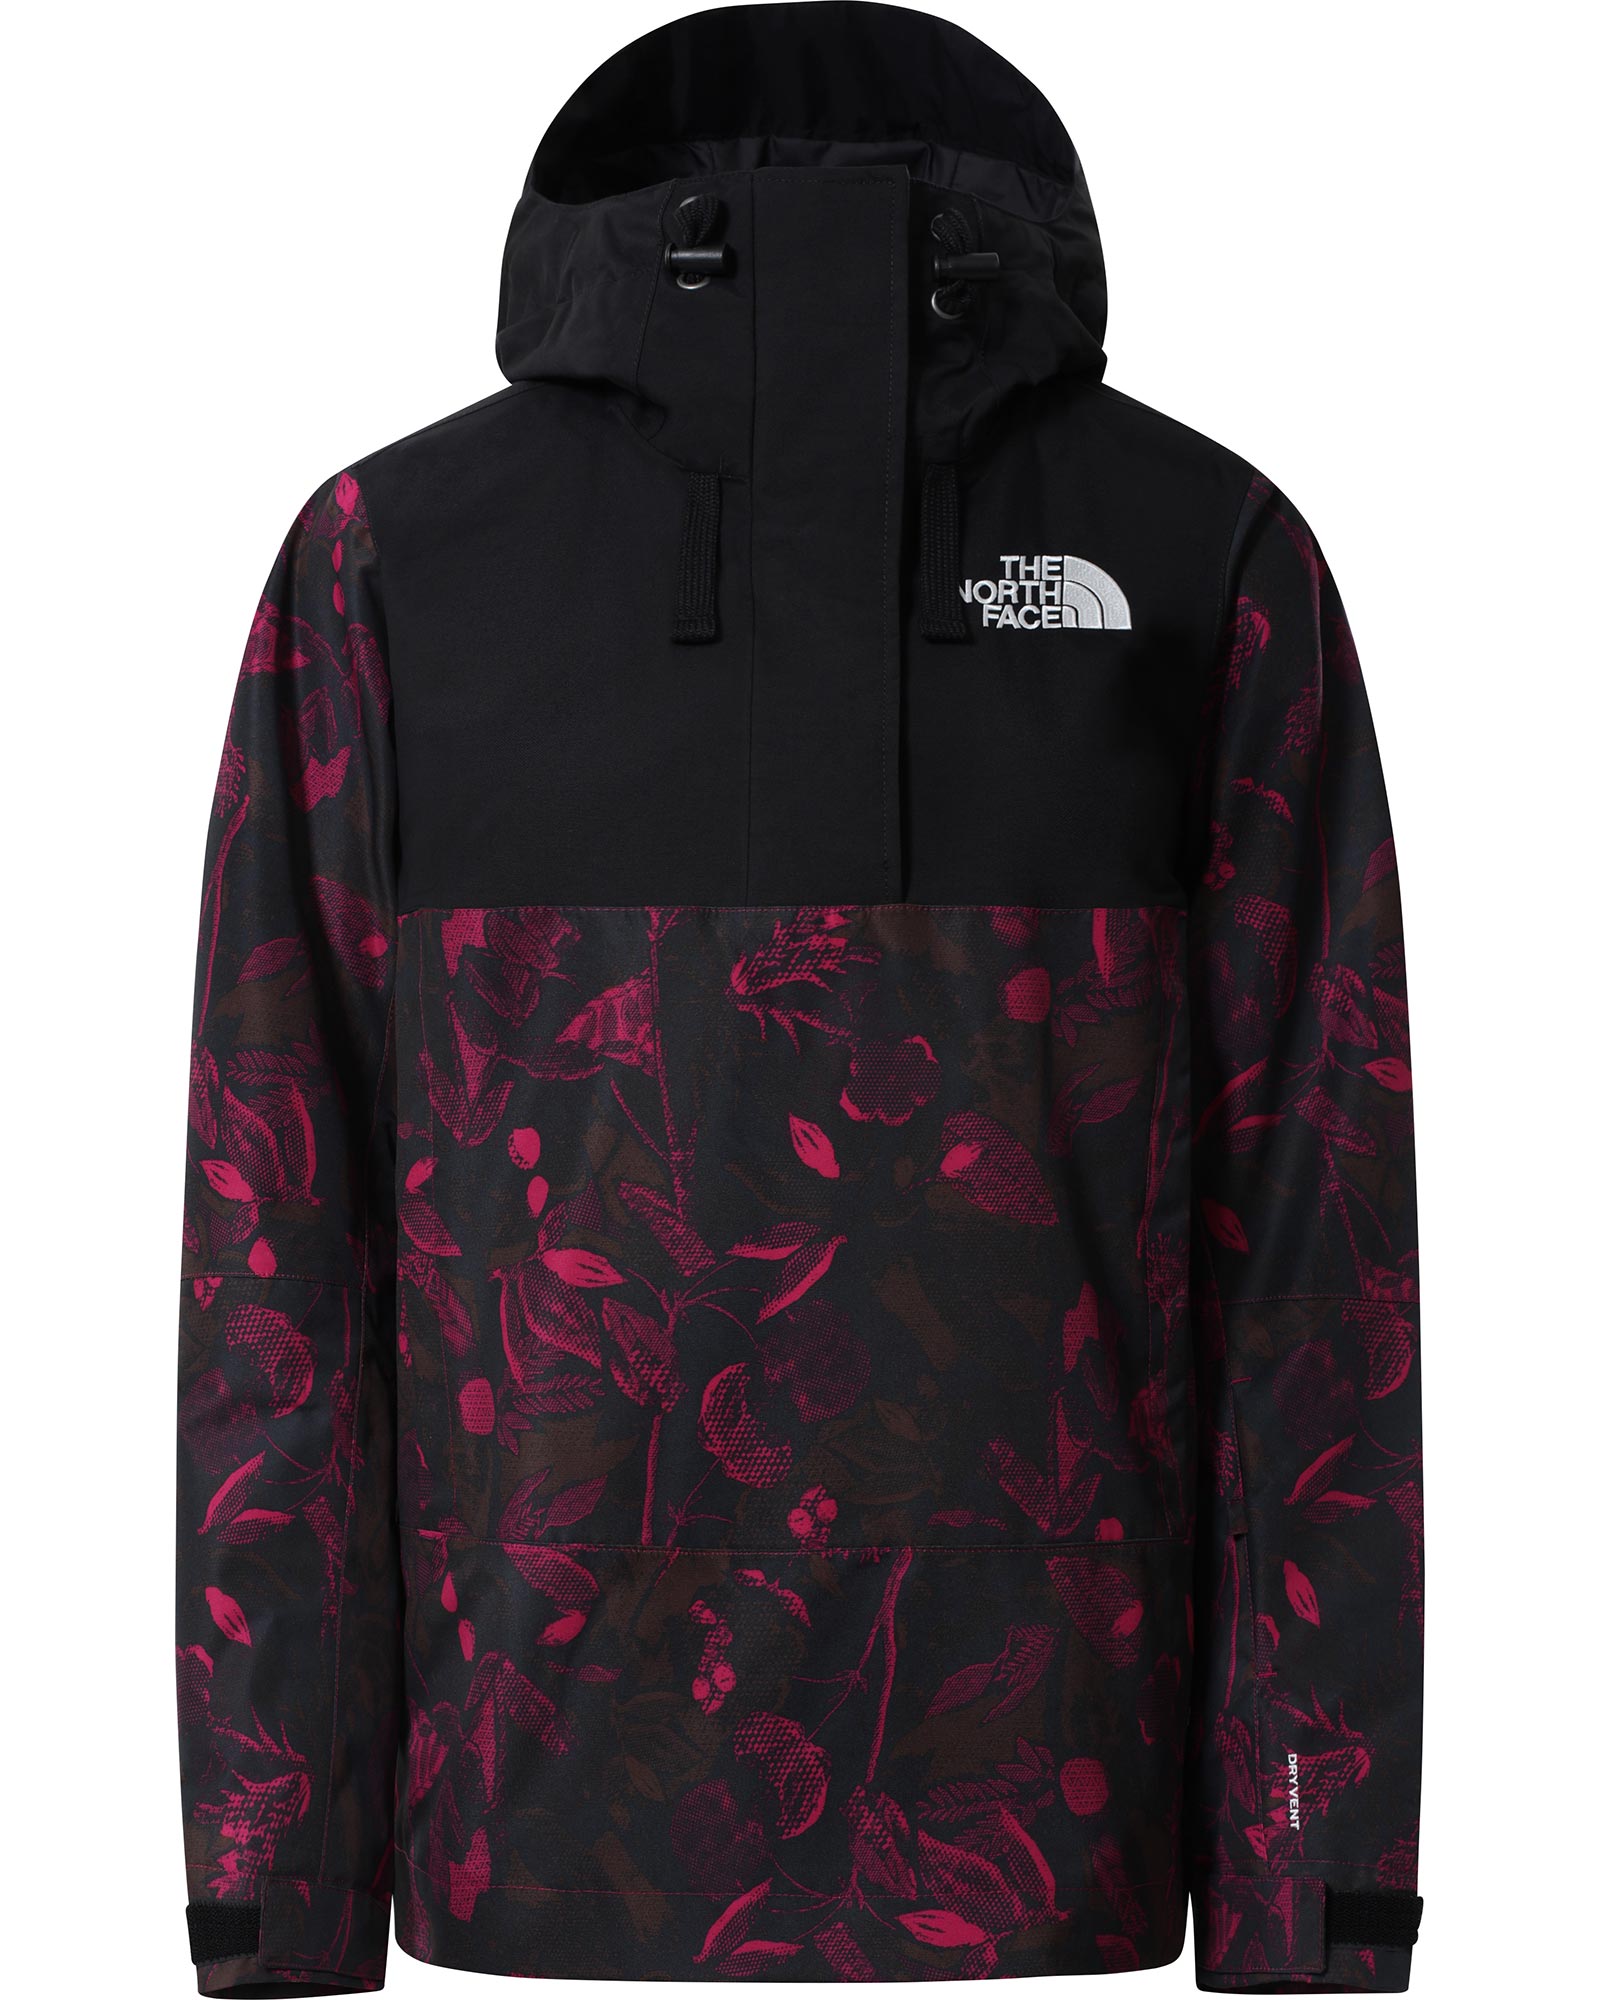 The North Face Tanager Women’s Anorak - Roxbury Pink Halftone Floral Print XS